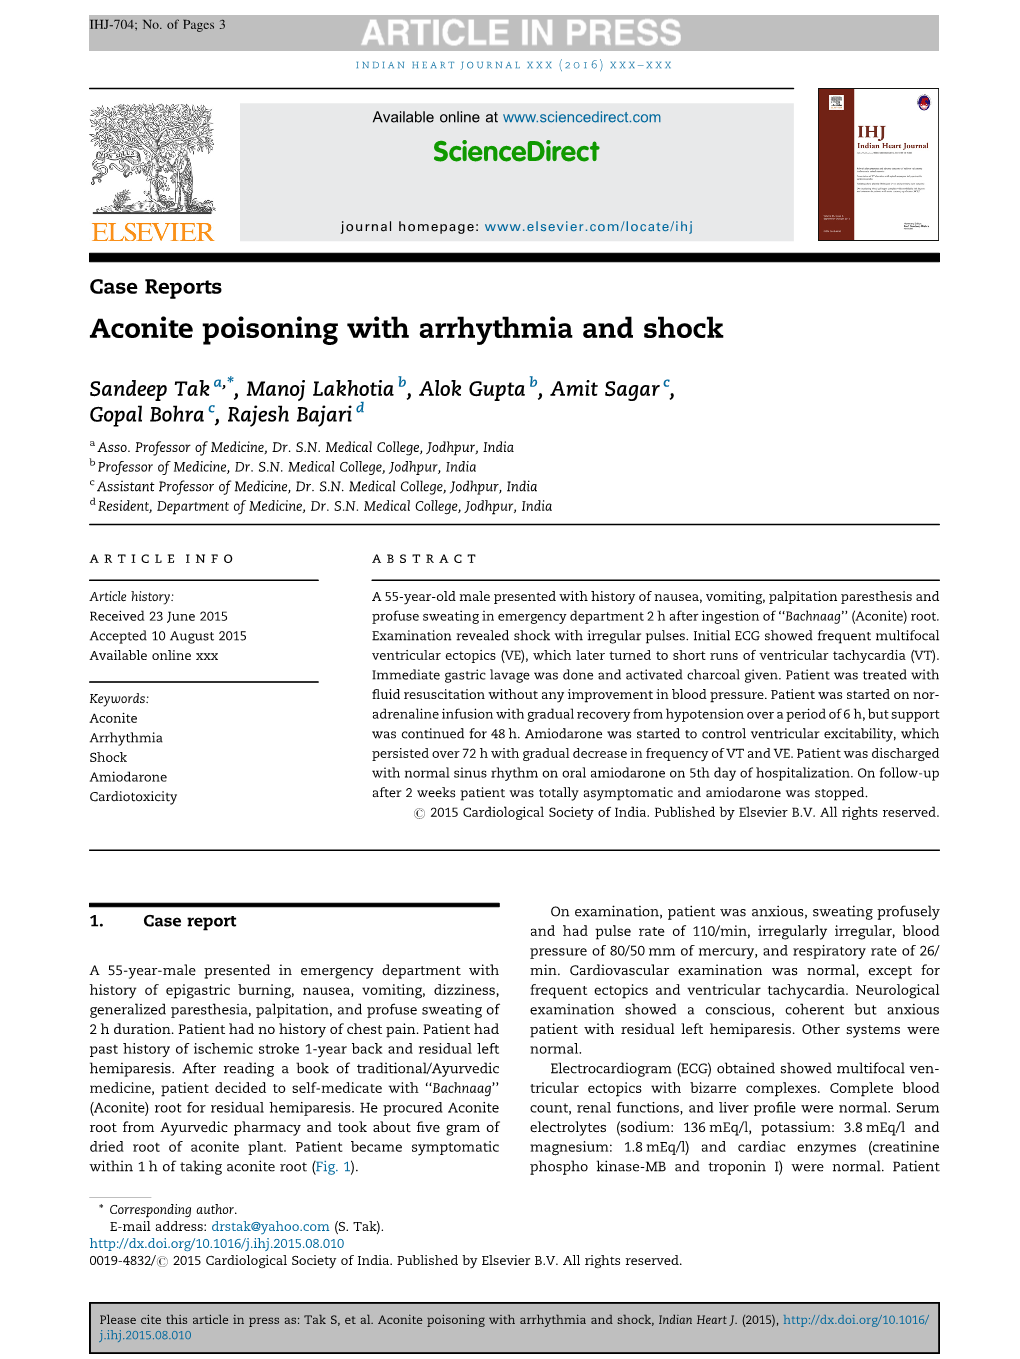 Aconite Poisoning with Arrhythmia and Shock